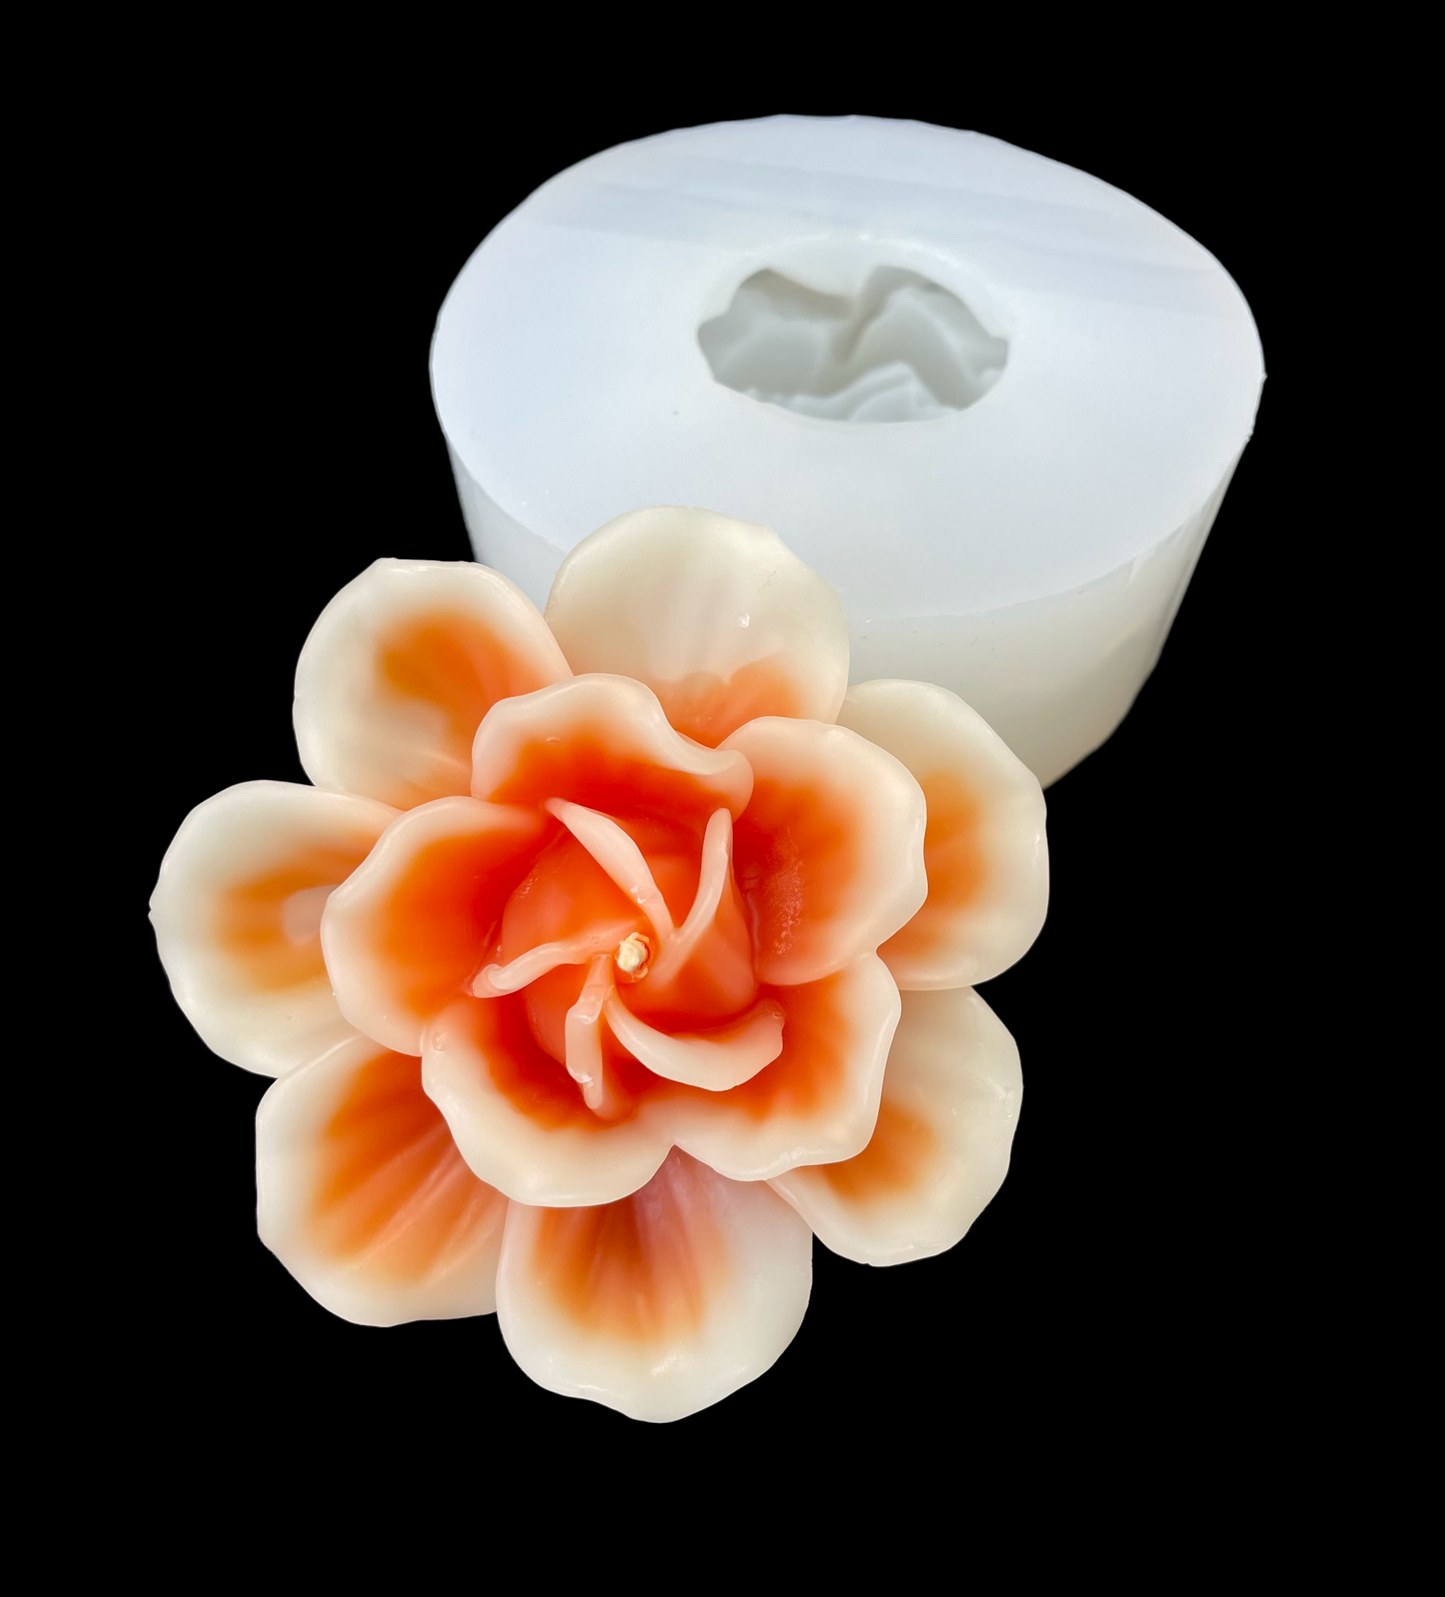 3D silicone floating flower mold - 3” - rose flower mold - beeswax candle mold - soap resin mold